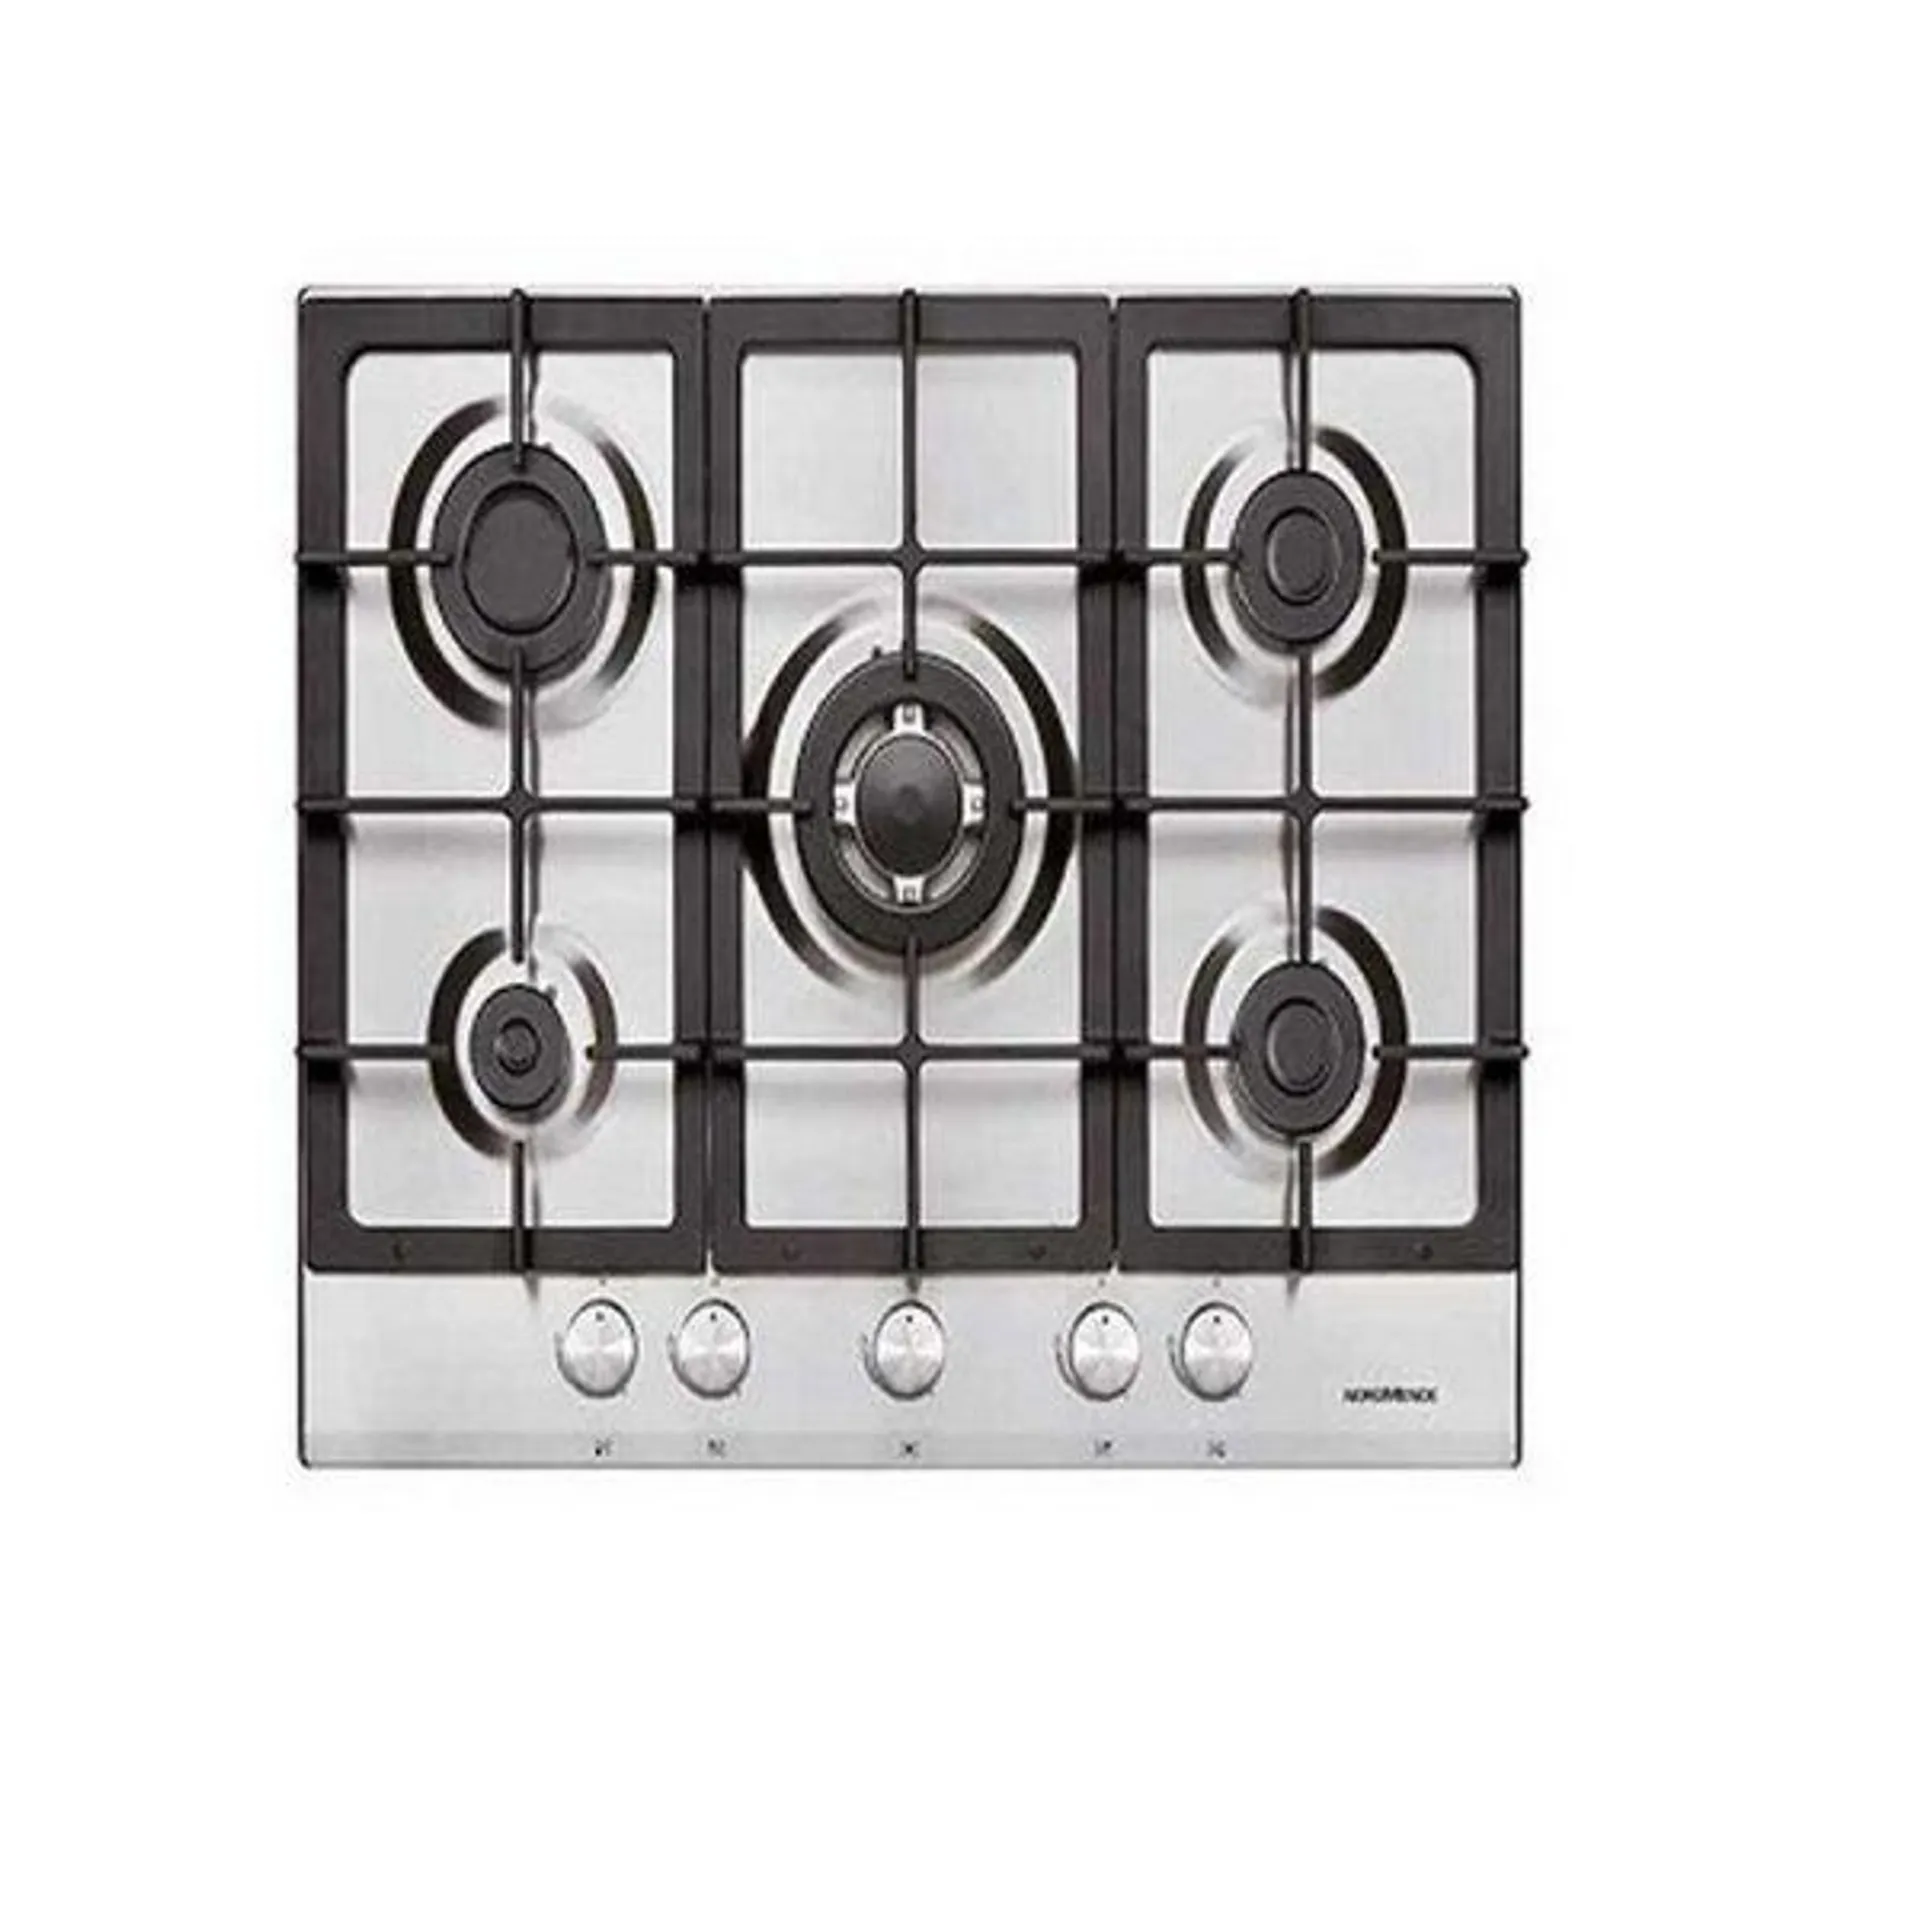 Nordmende 70CM Gas Hob – Stainless Steel